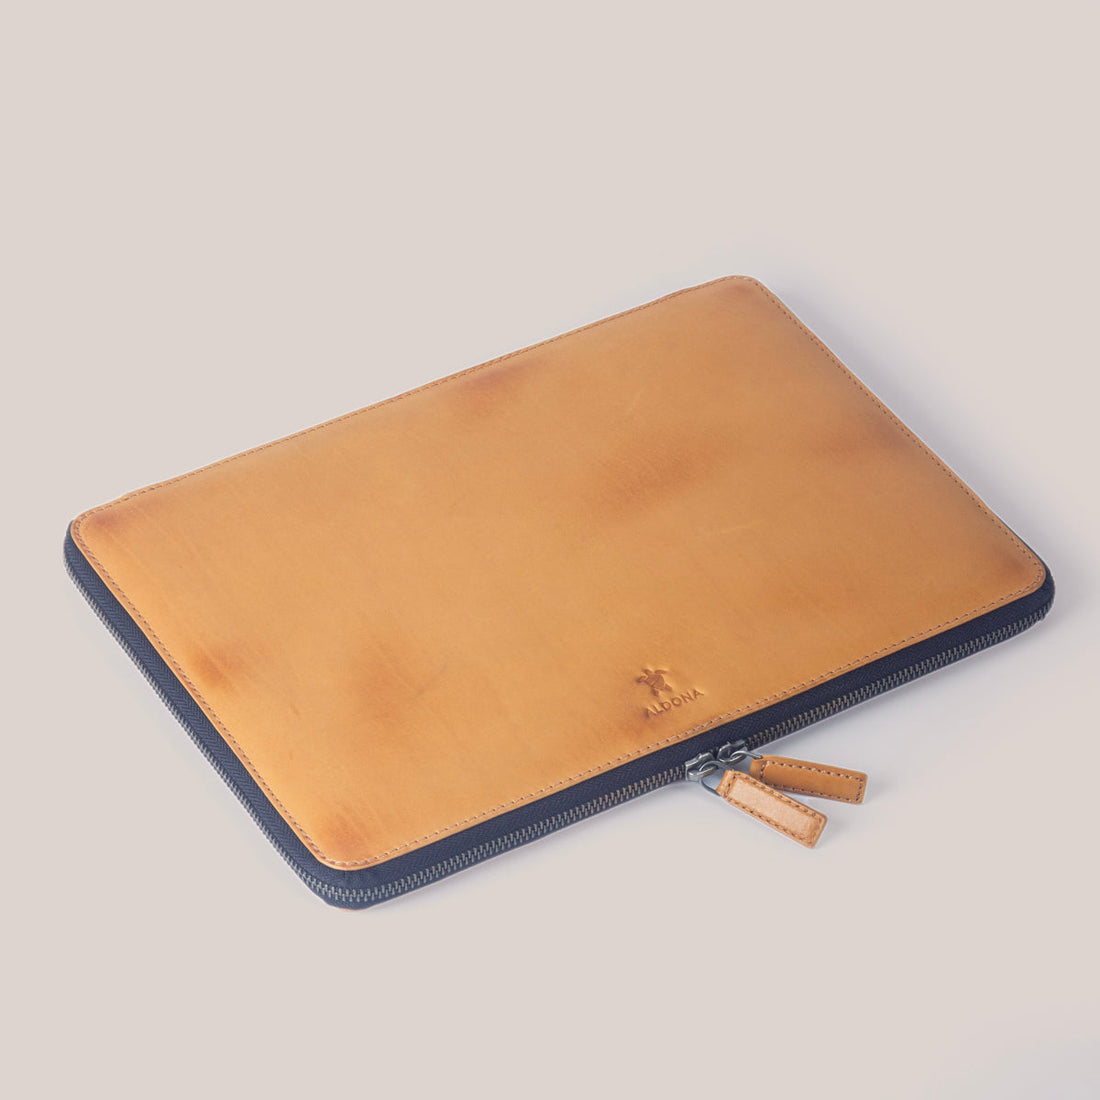 Microsoft Surface Book 15 Zippered Laptop Case - Burnt Tobacco